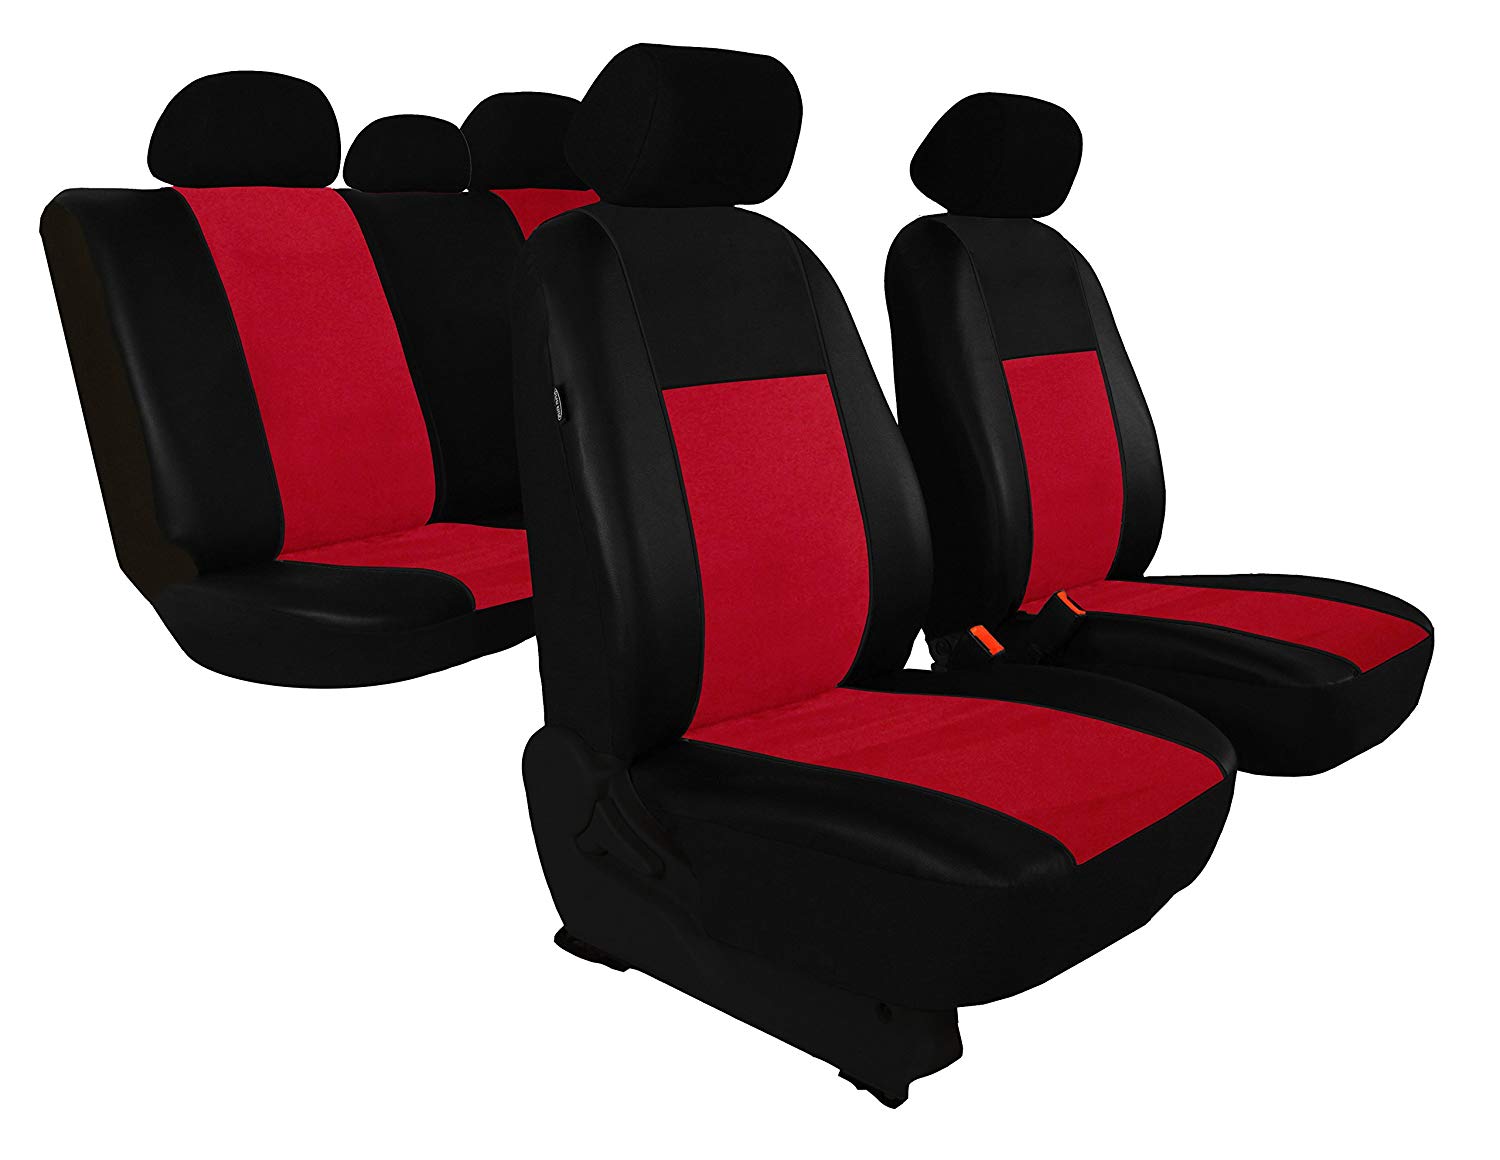 \'SEAT COVER Vauxhall Astra K 2015 Red \"Unico in this listing (Other Offers Available in 7 Colours)